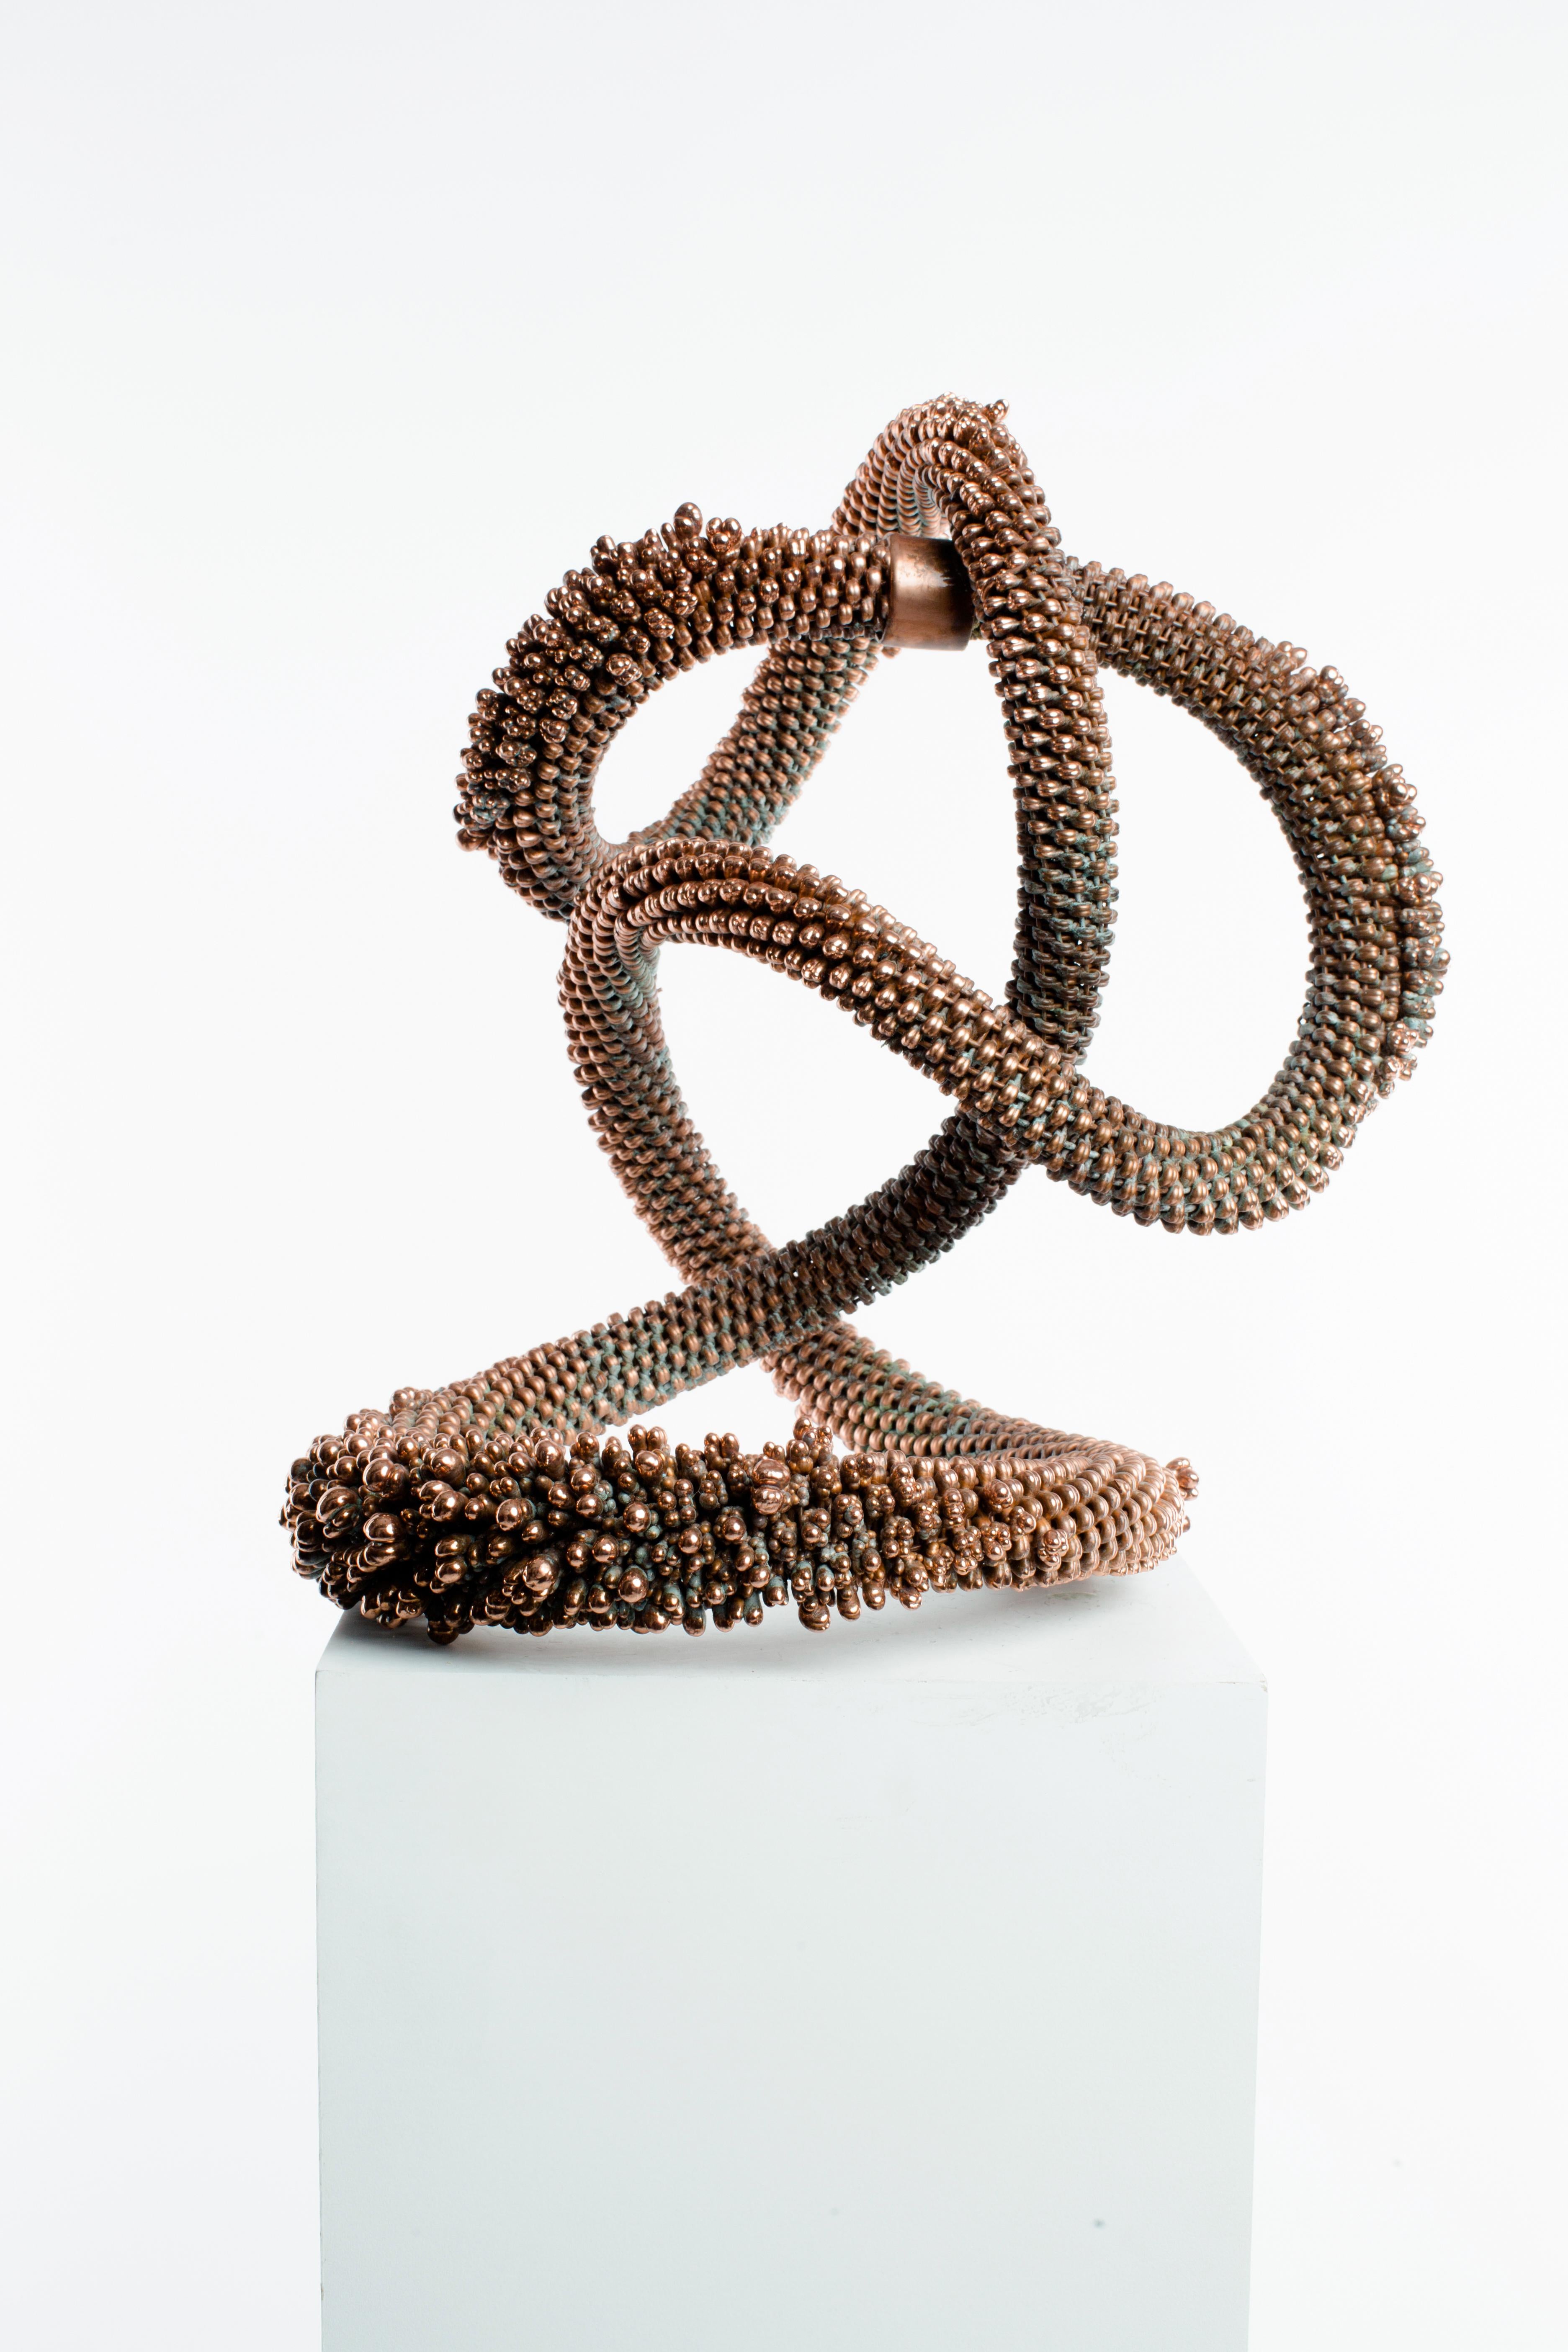 Driaan Claassen Abstract Sculpture - Copper, Crystal, Polished, Raw, Abstract, Contemporary, Modern, Art